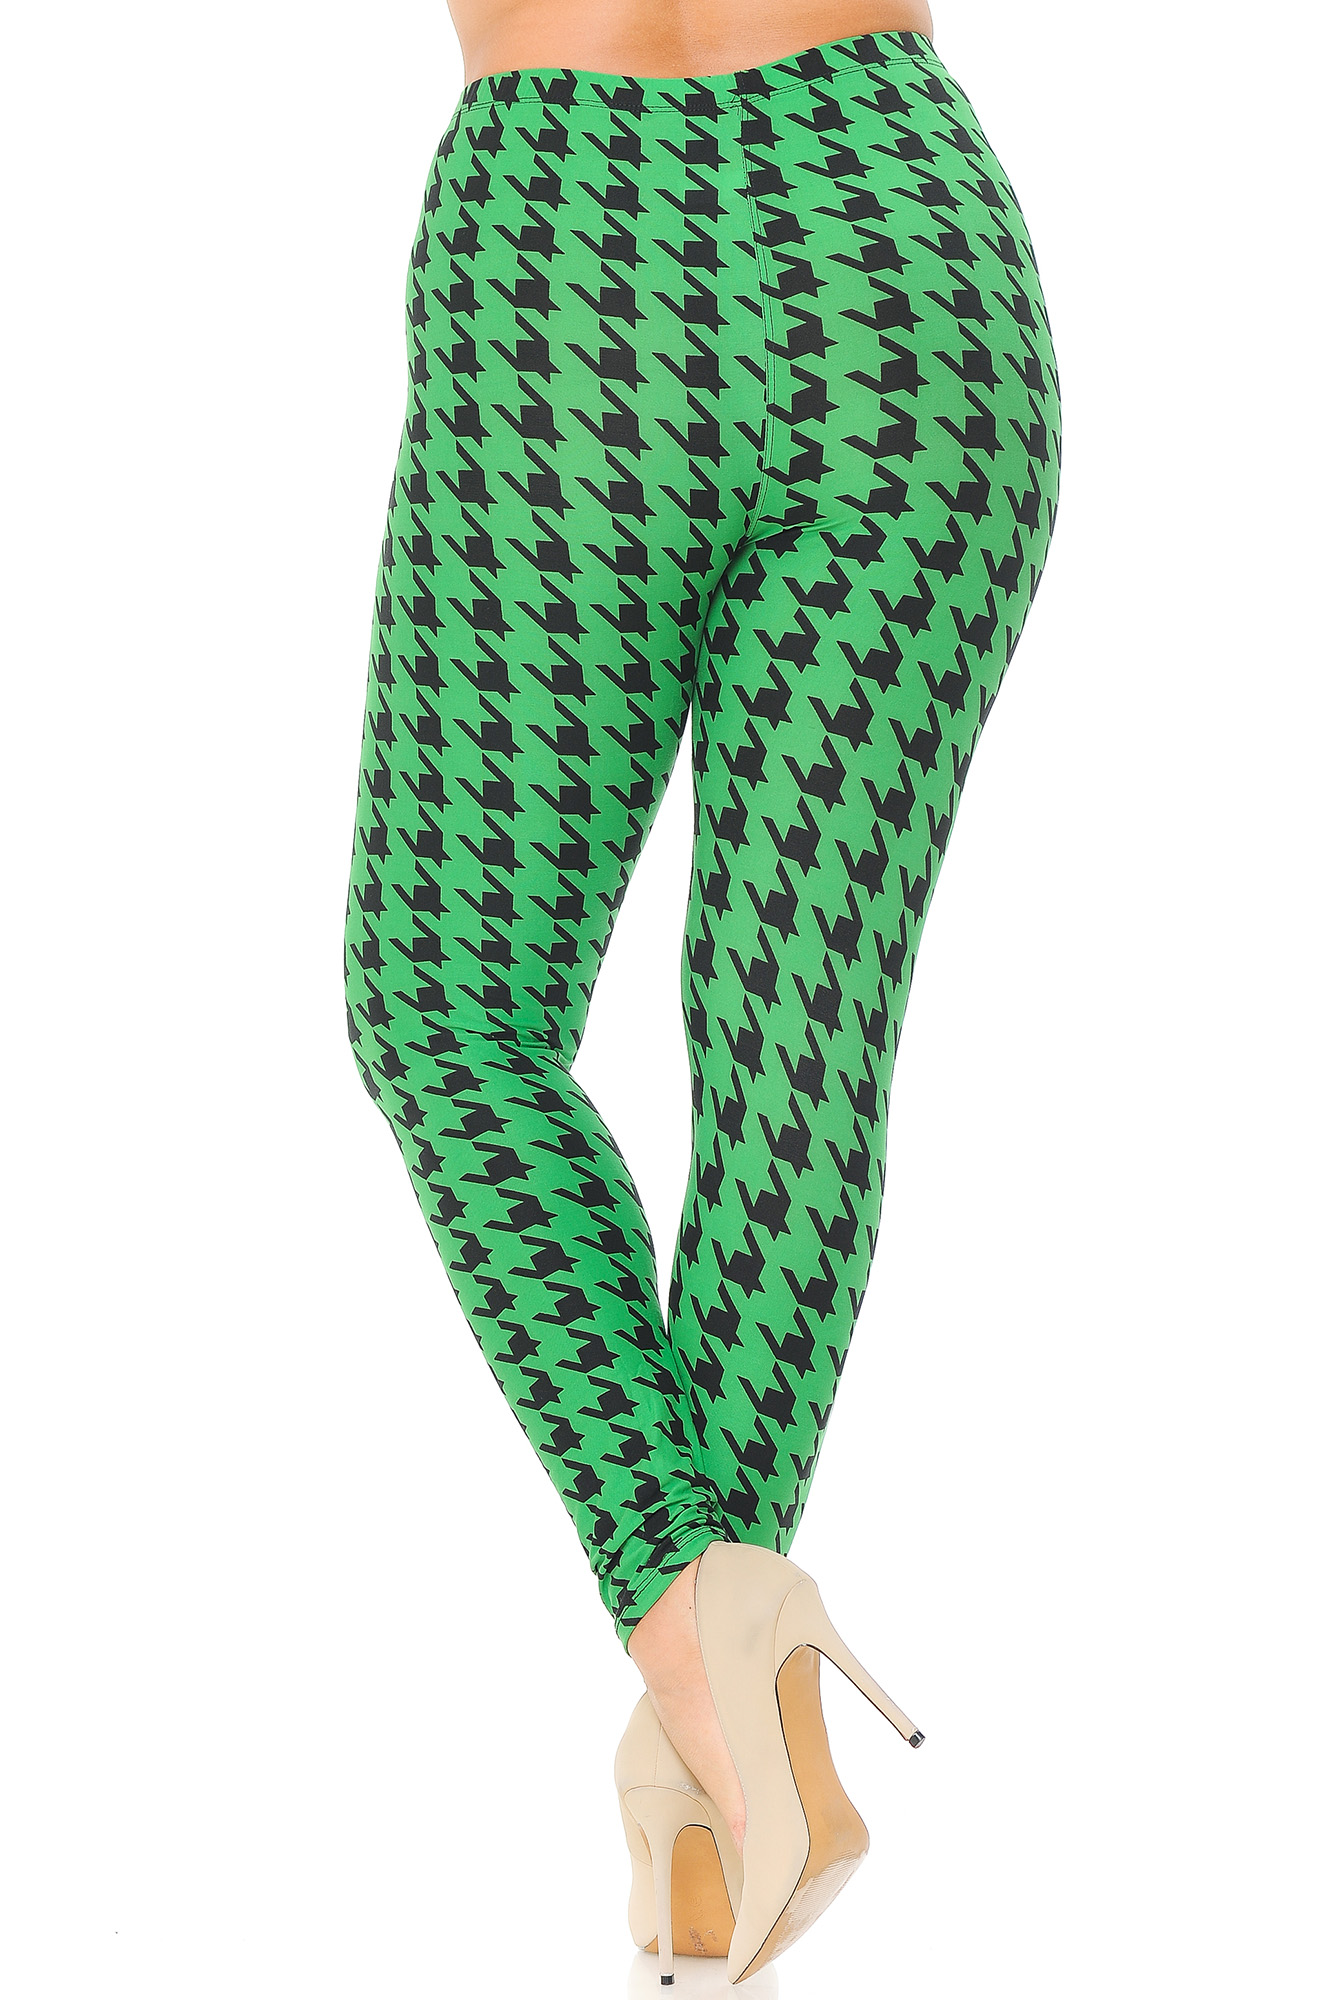 Wholesale Buttery Smooth Houndstooth Extra Plus Size Leggings - 3X-5X